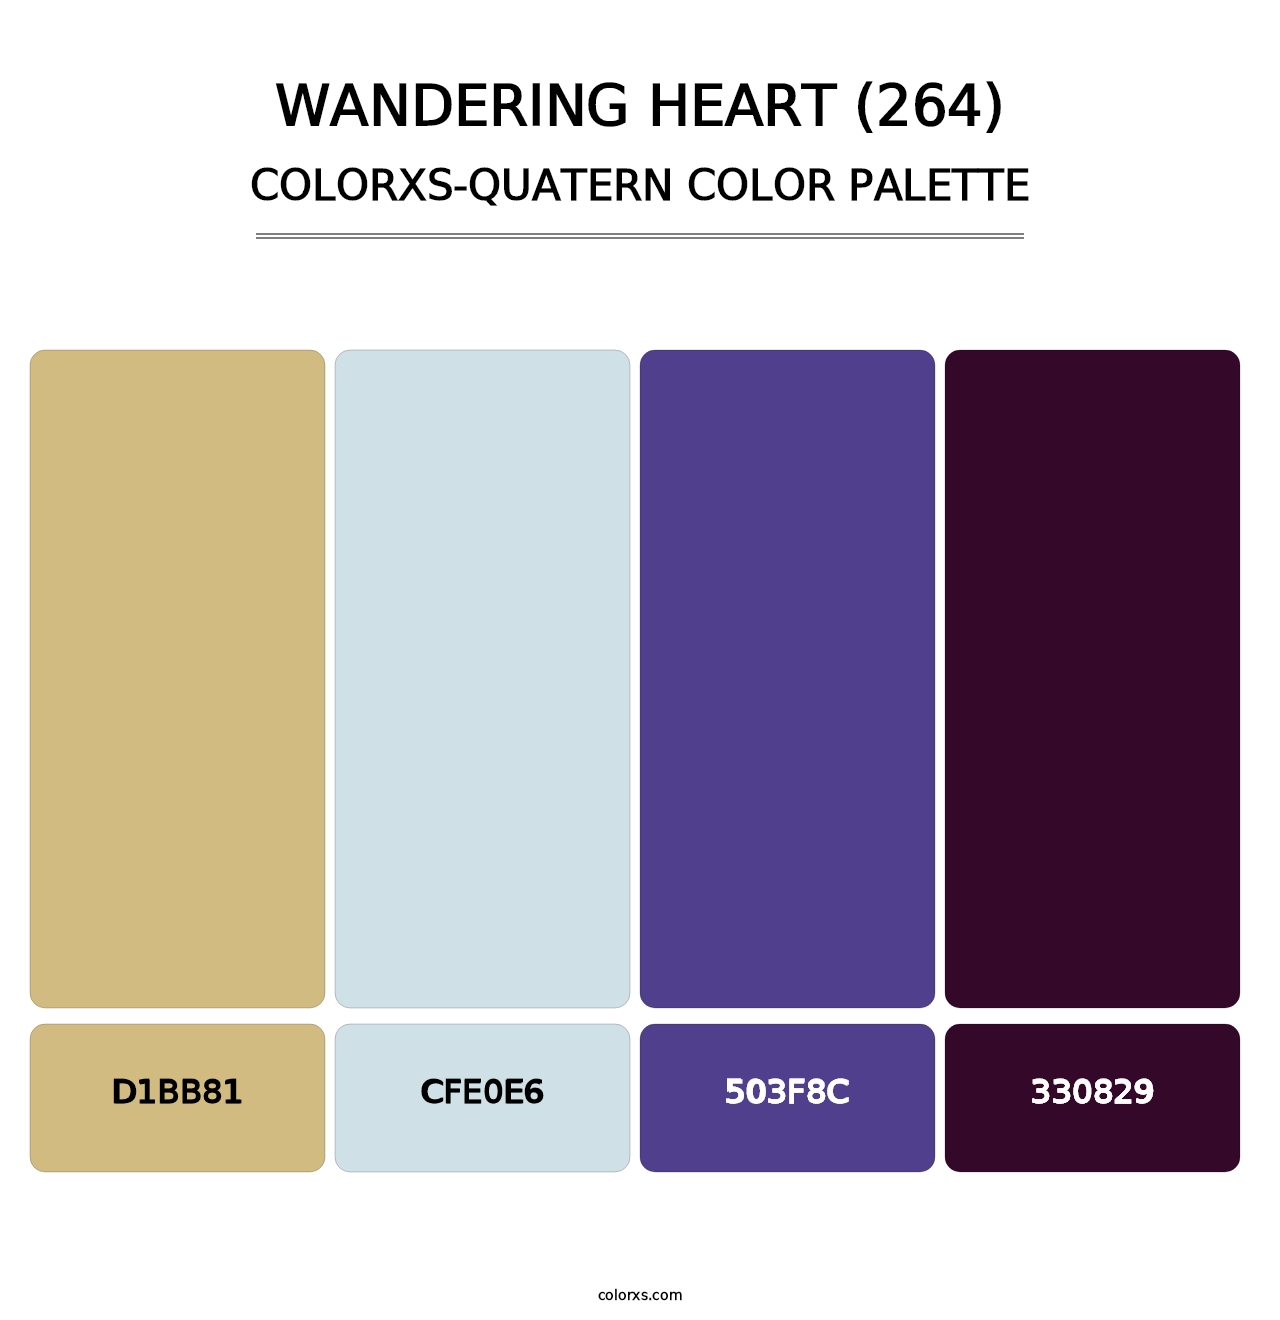 Wandering Heart (264) - Colorxs Quatern Palette